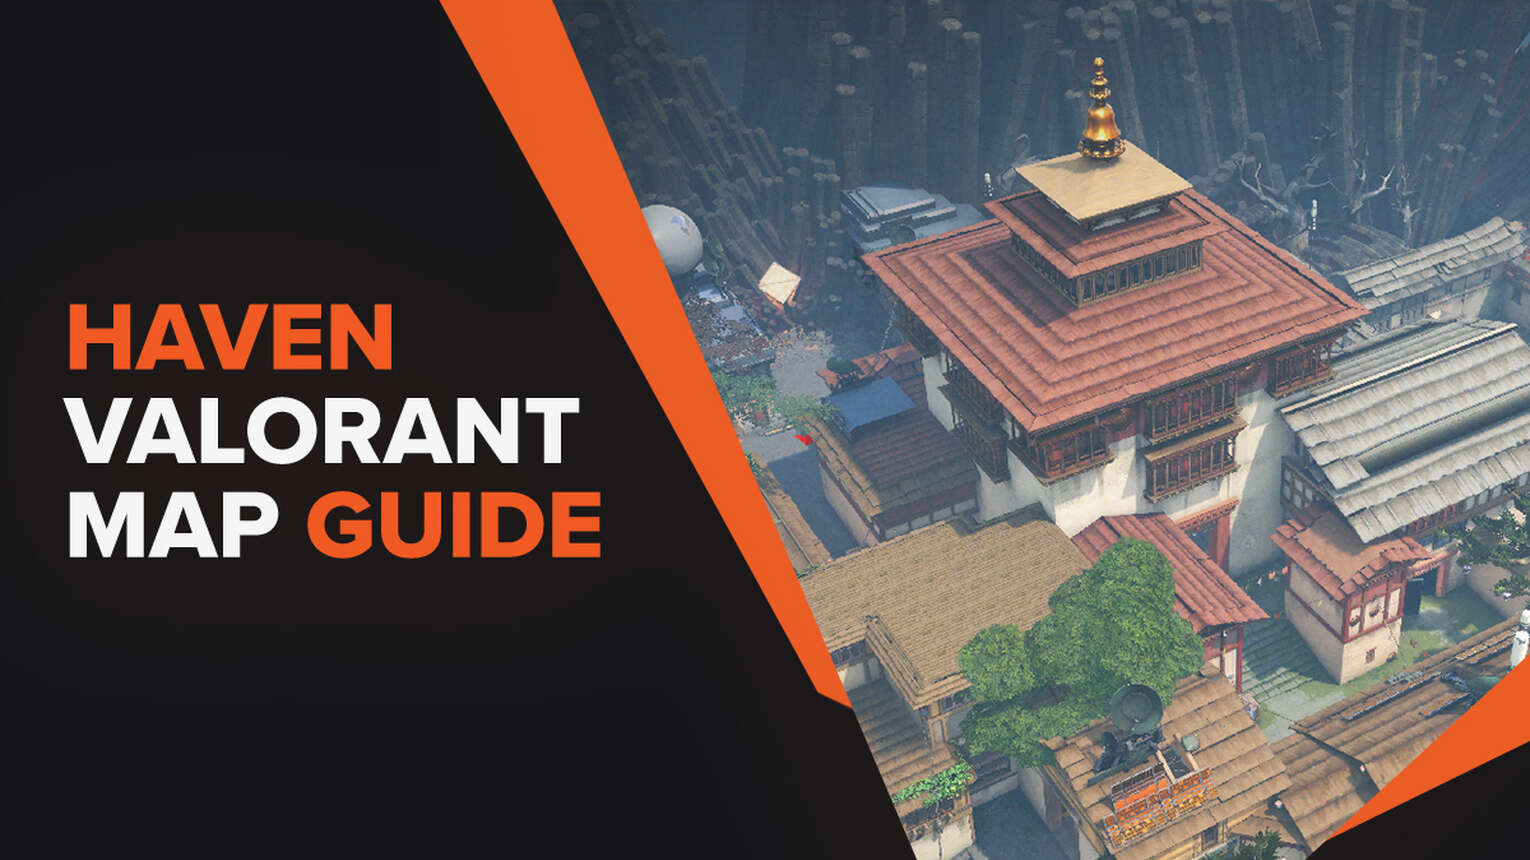 The complete Haven Valorant map guide